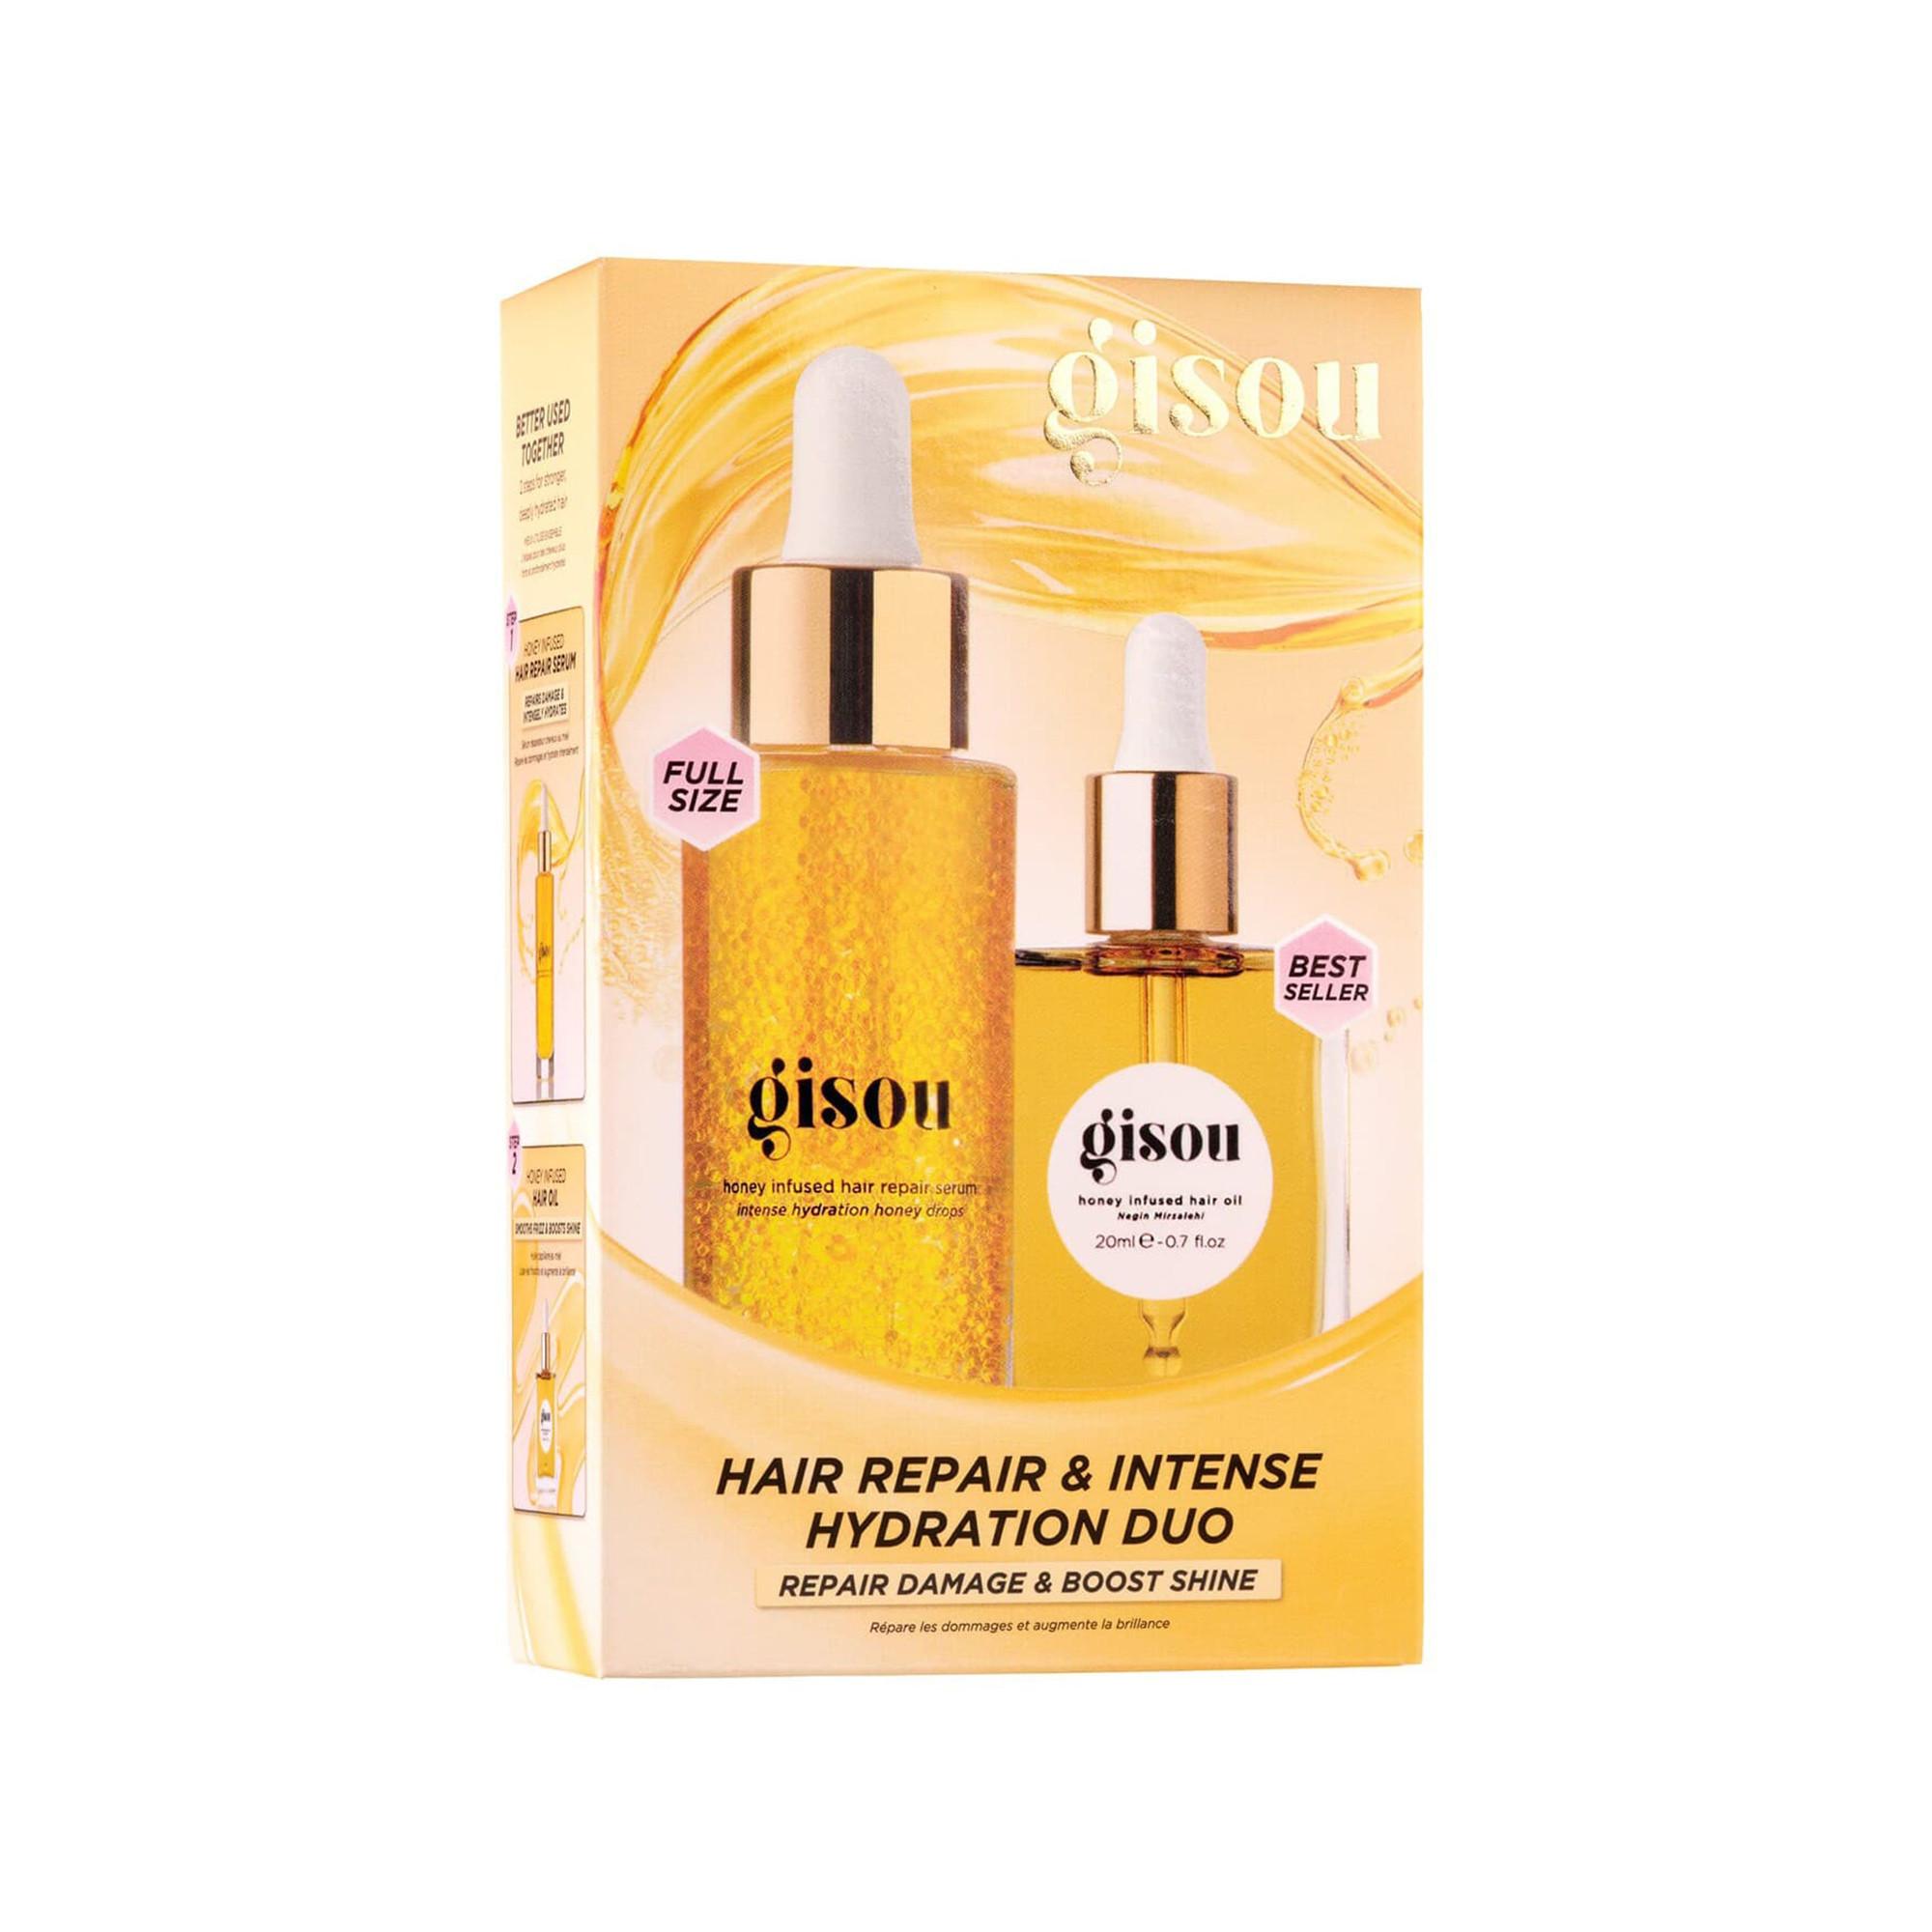 GISOU Honey Infused Hair Repair & Intense Hydration Duo - Serum and Oil for Damaged and Dull Hair 